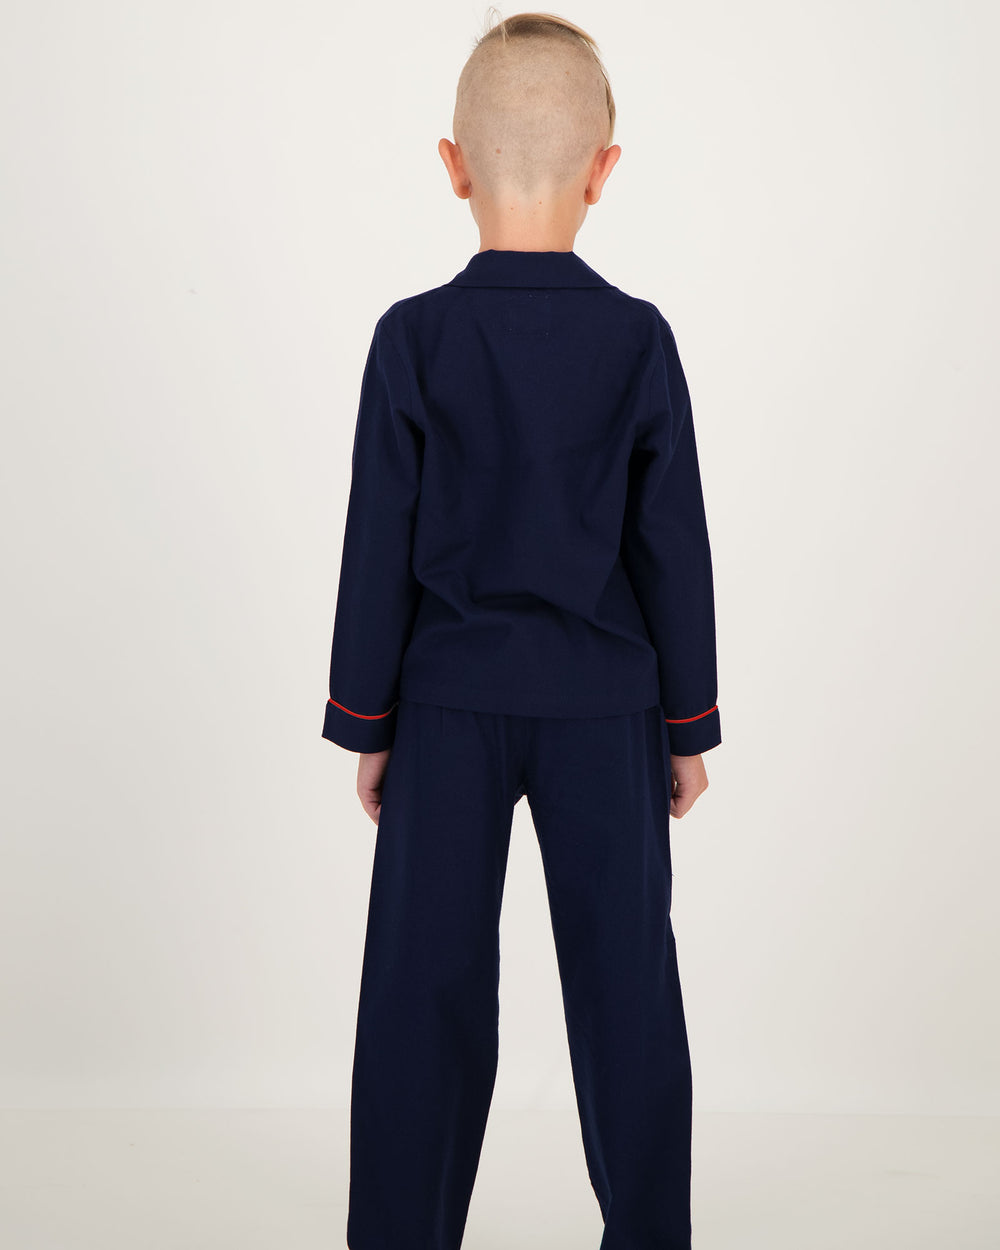 Boys Long Flannel Pyjamas Navy with Red Piping Back - Woodstock Laundry SA